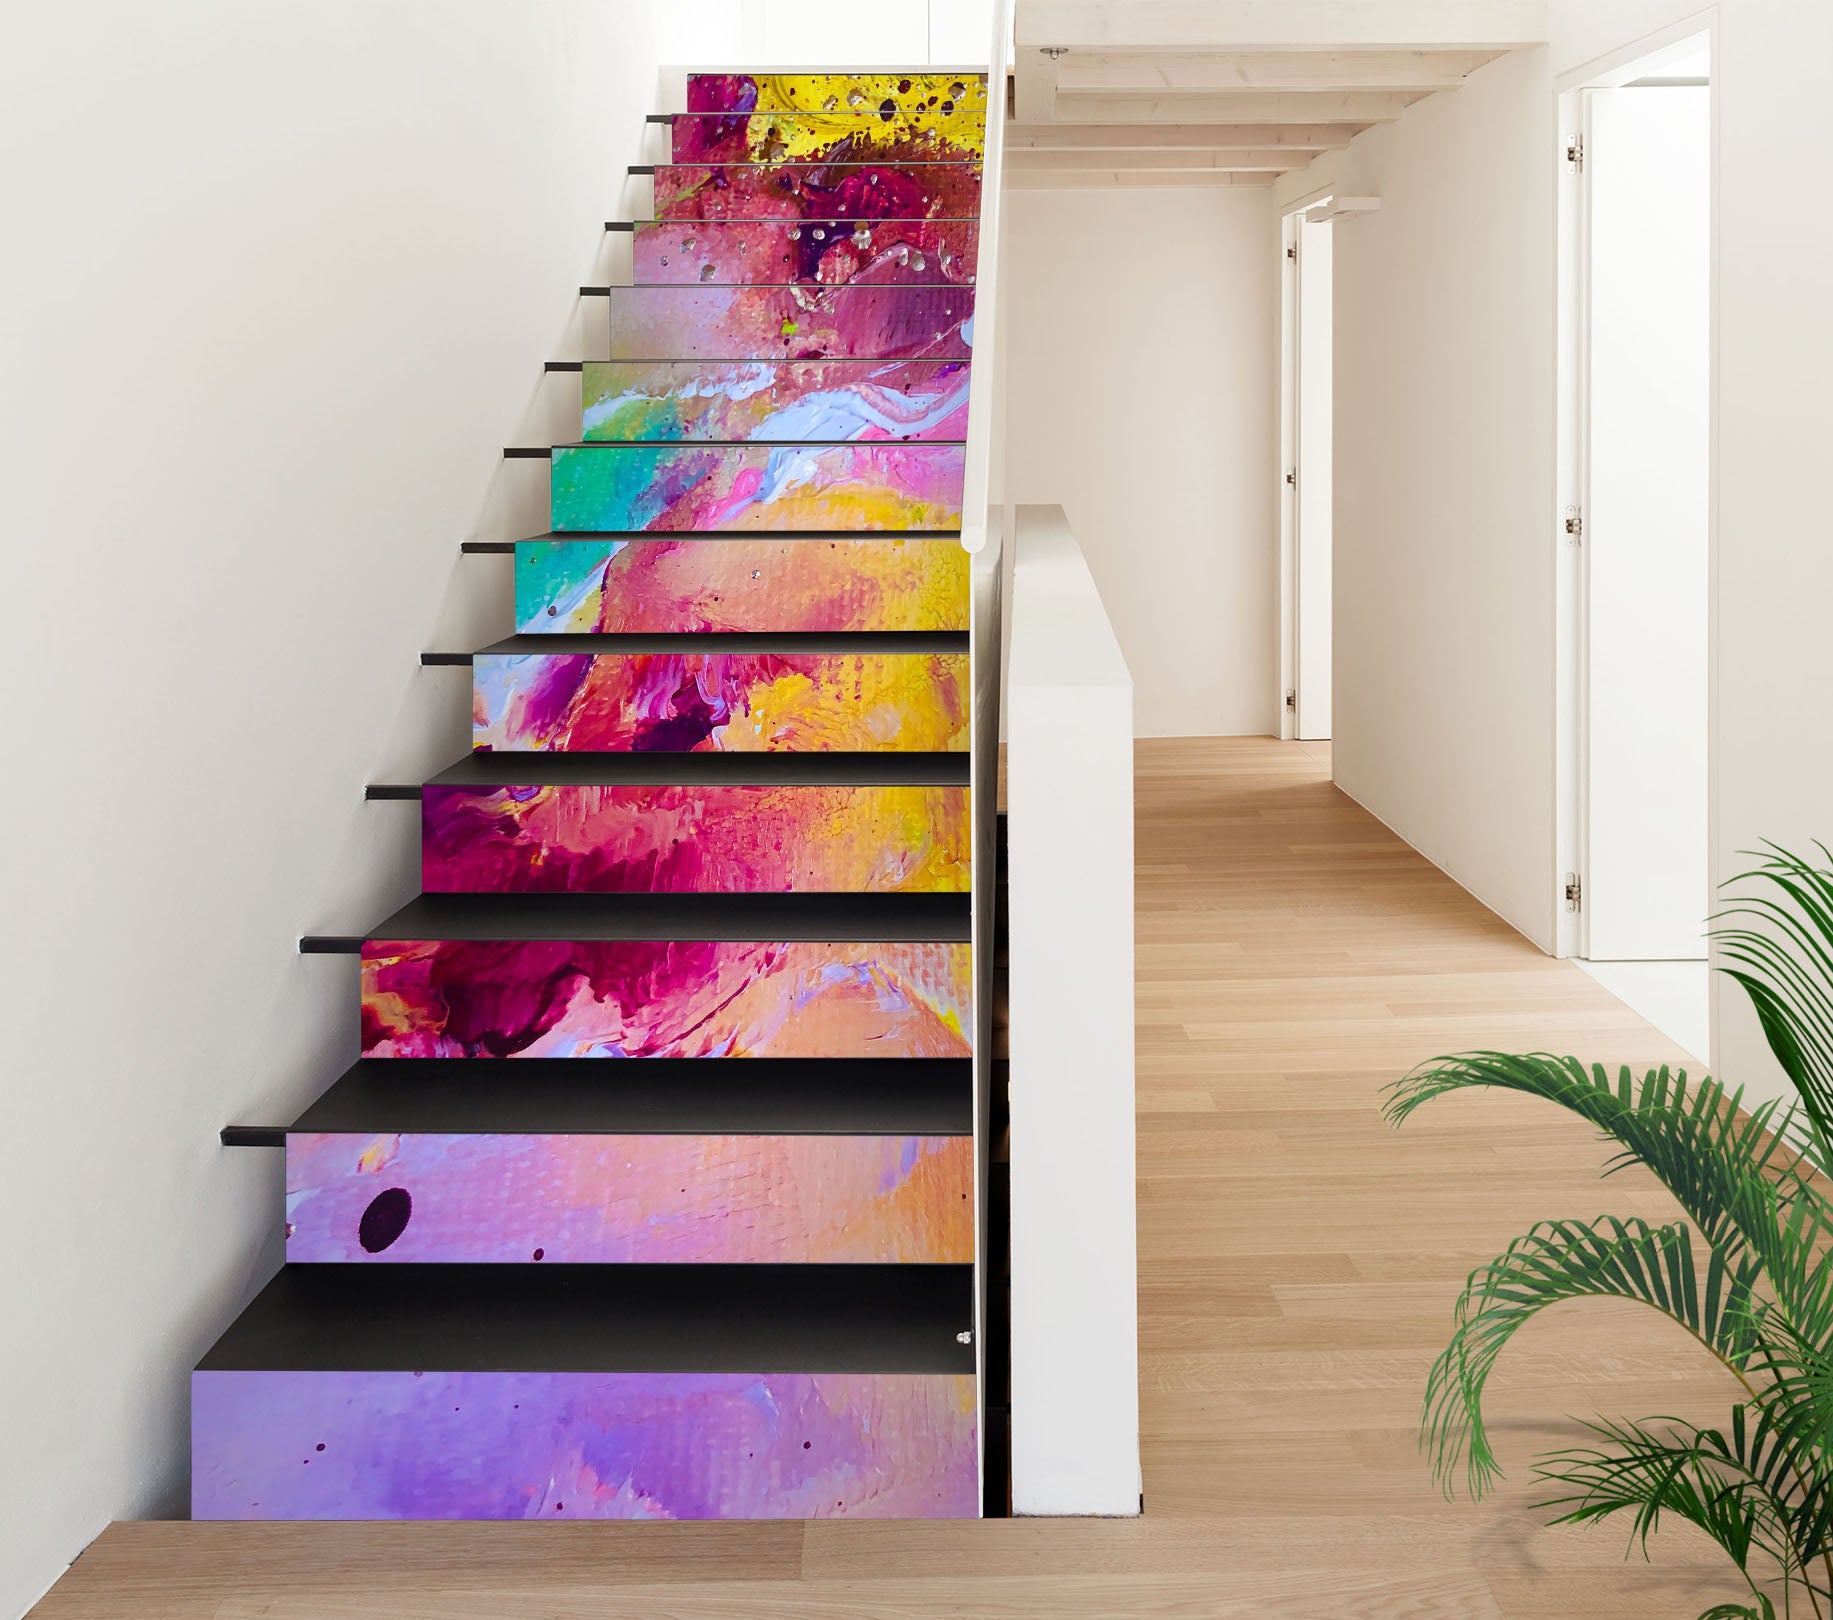 3D Color Painting 2232 Skromova Marina Stair Risers